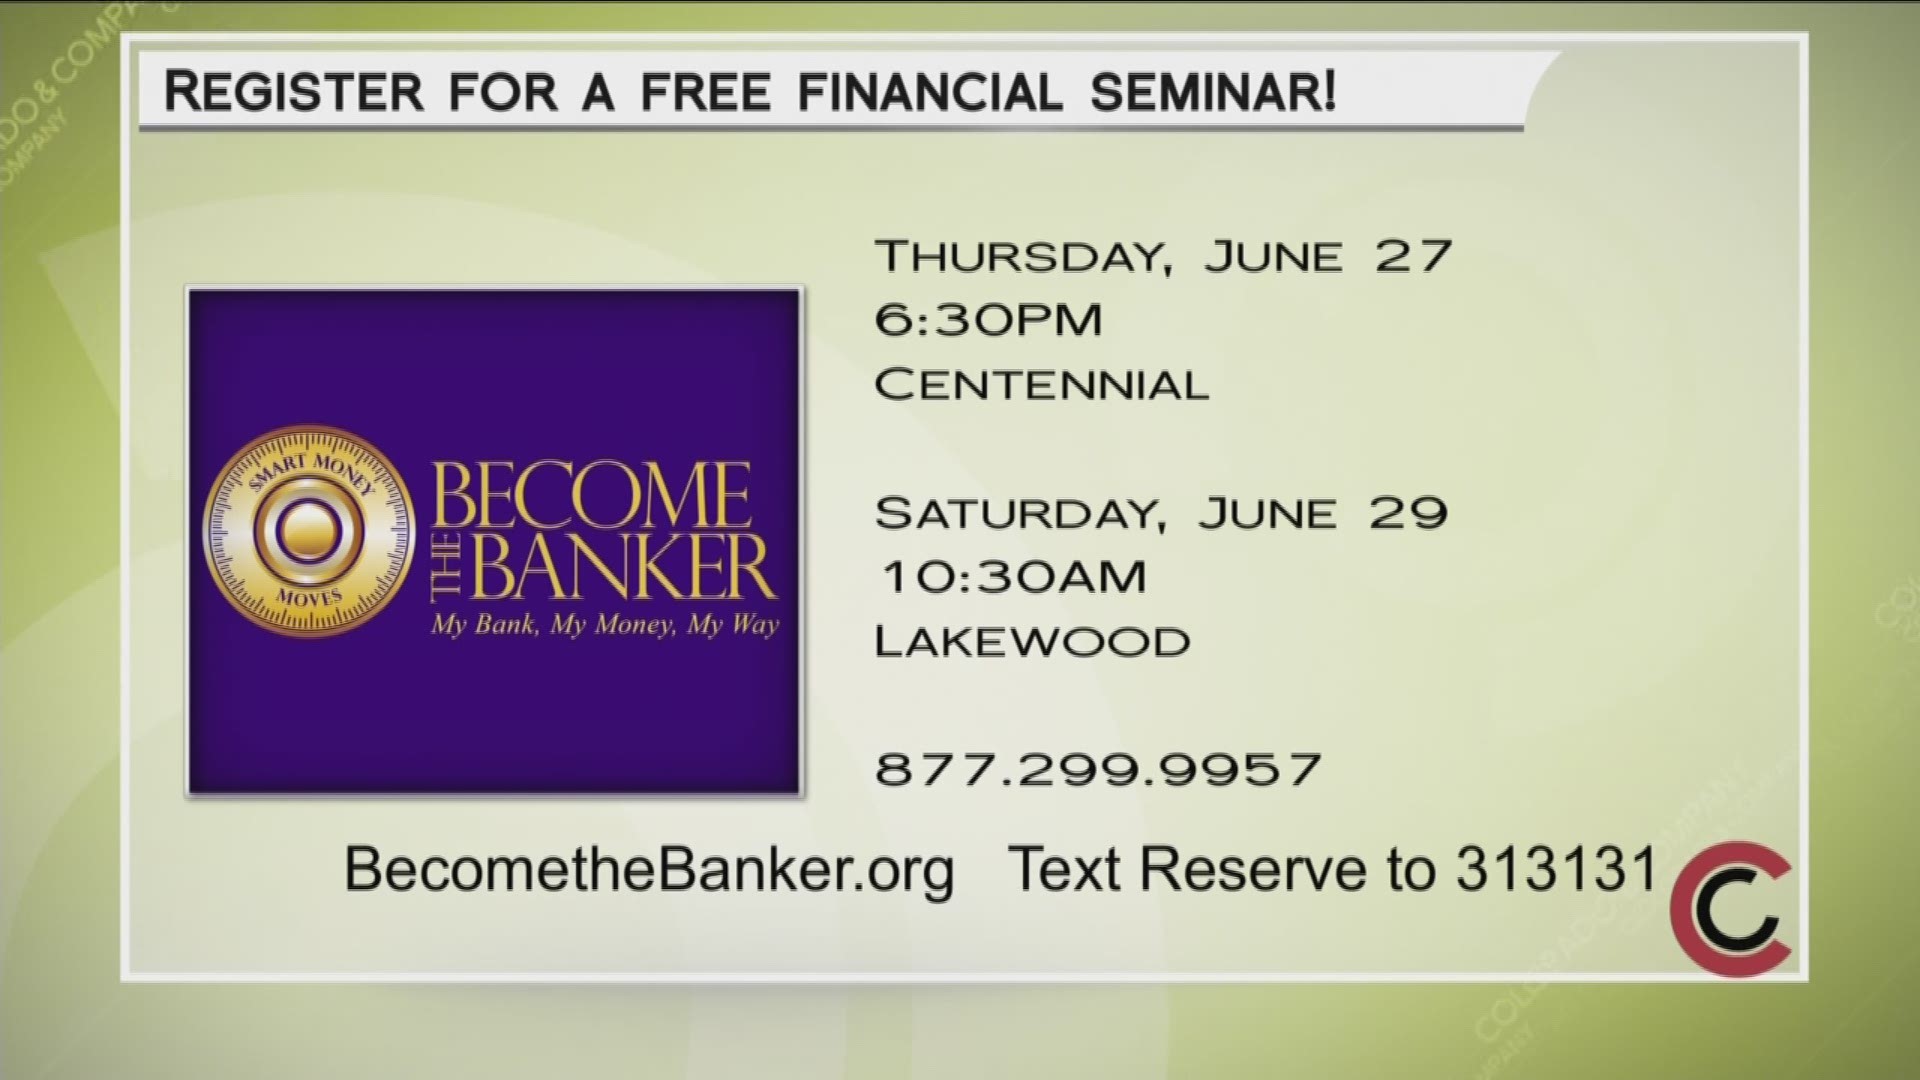 Reserve your place at an upcoming Become the Banker seminar. There are a couple coming up to choose from—June 27 at 6:30PM in Centennial, or June 29 at 10:30AM in Lakewood. Call 877.299.9957 or text RESERVE to 313131 to save your spot. Learn more at www.BecomeTheBanker.org. 
THIS INTERVIEW HAS COMMERCIAL CONTENT. PRODUCTS AND SERVICES FEATURED APPEAR AS PAID ADVERTISING.